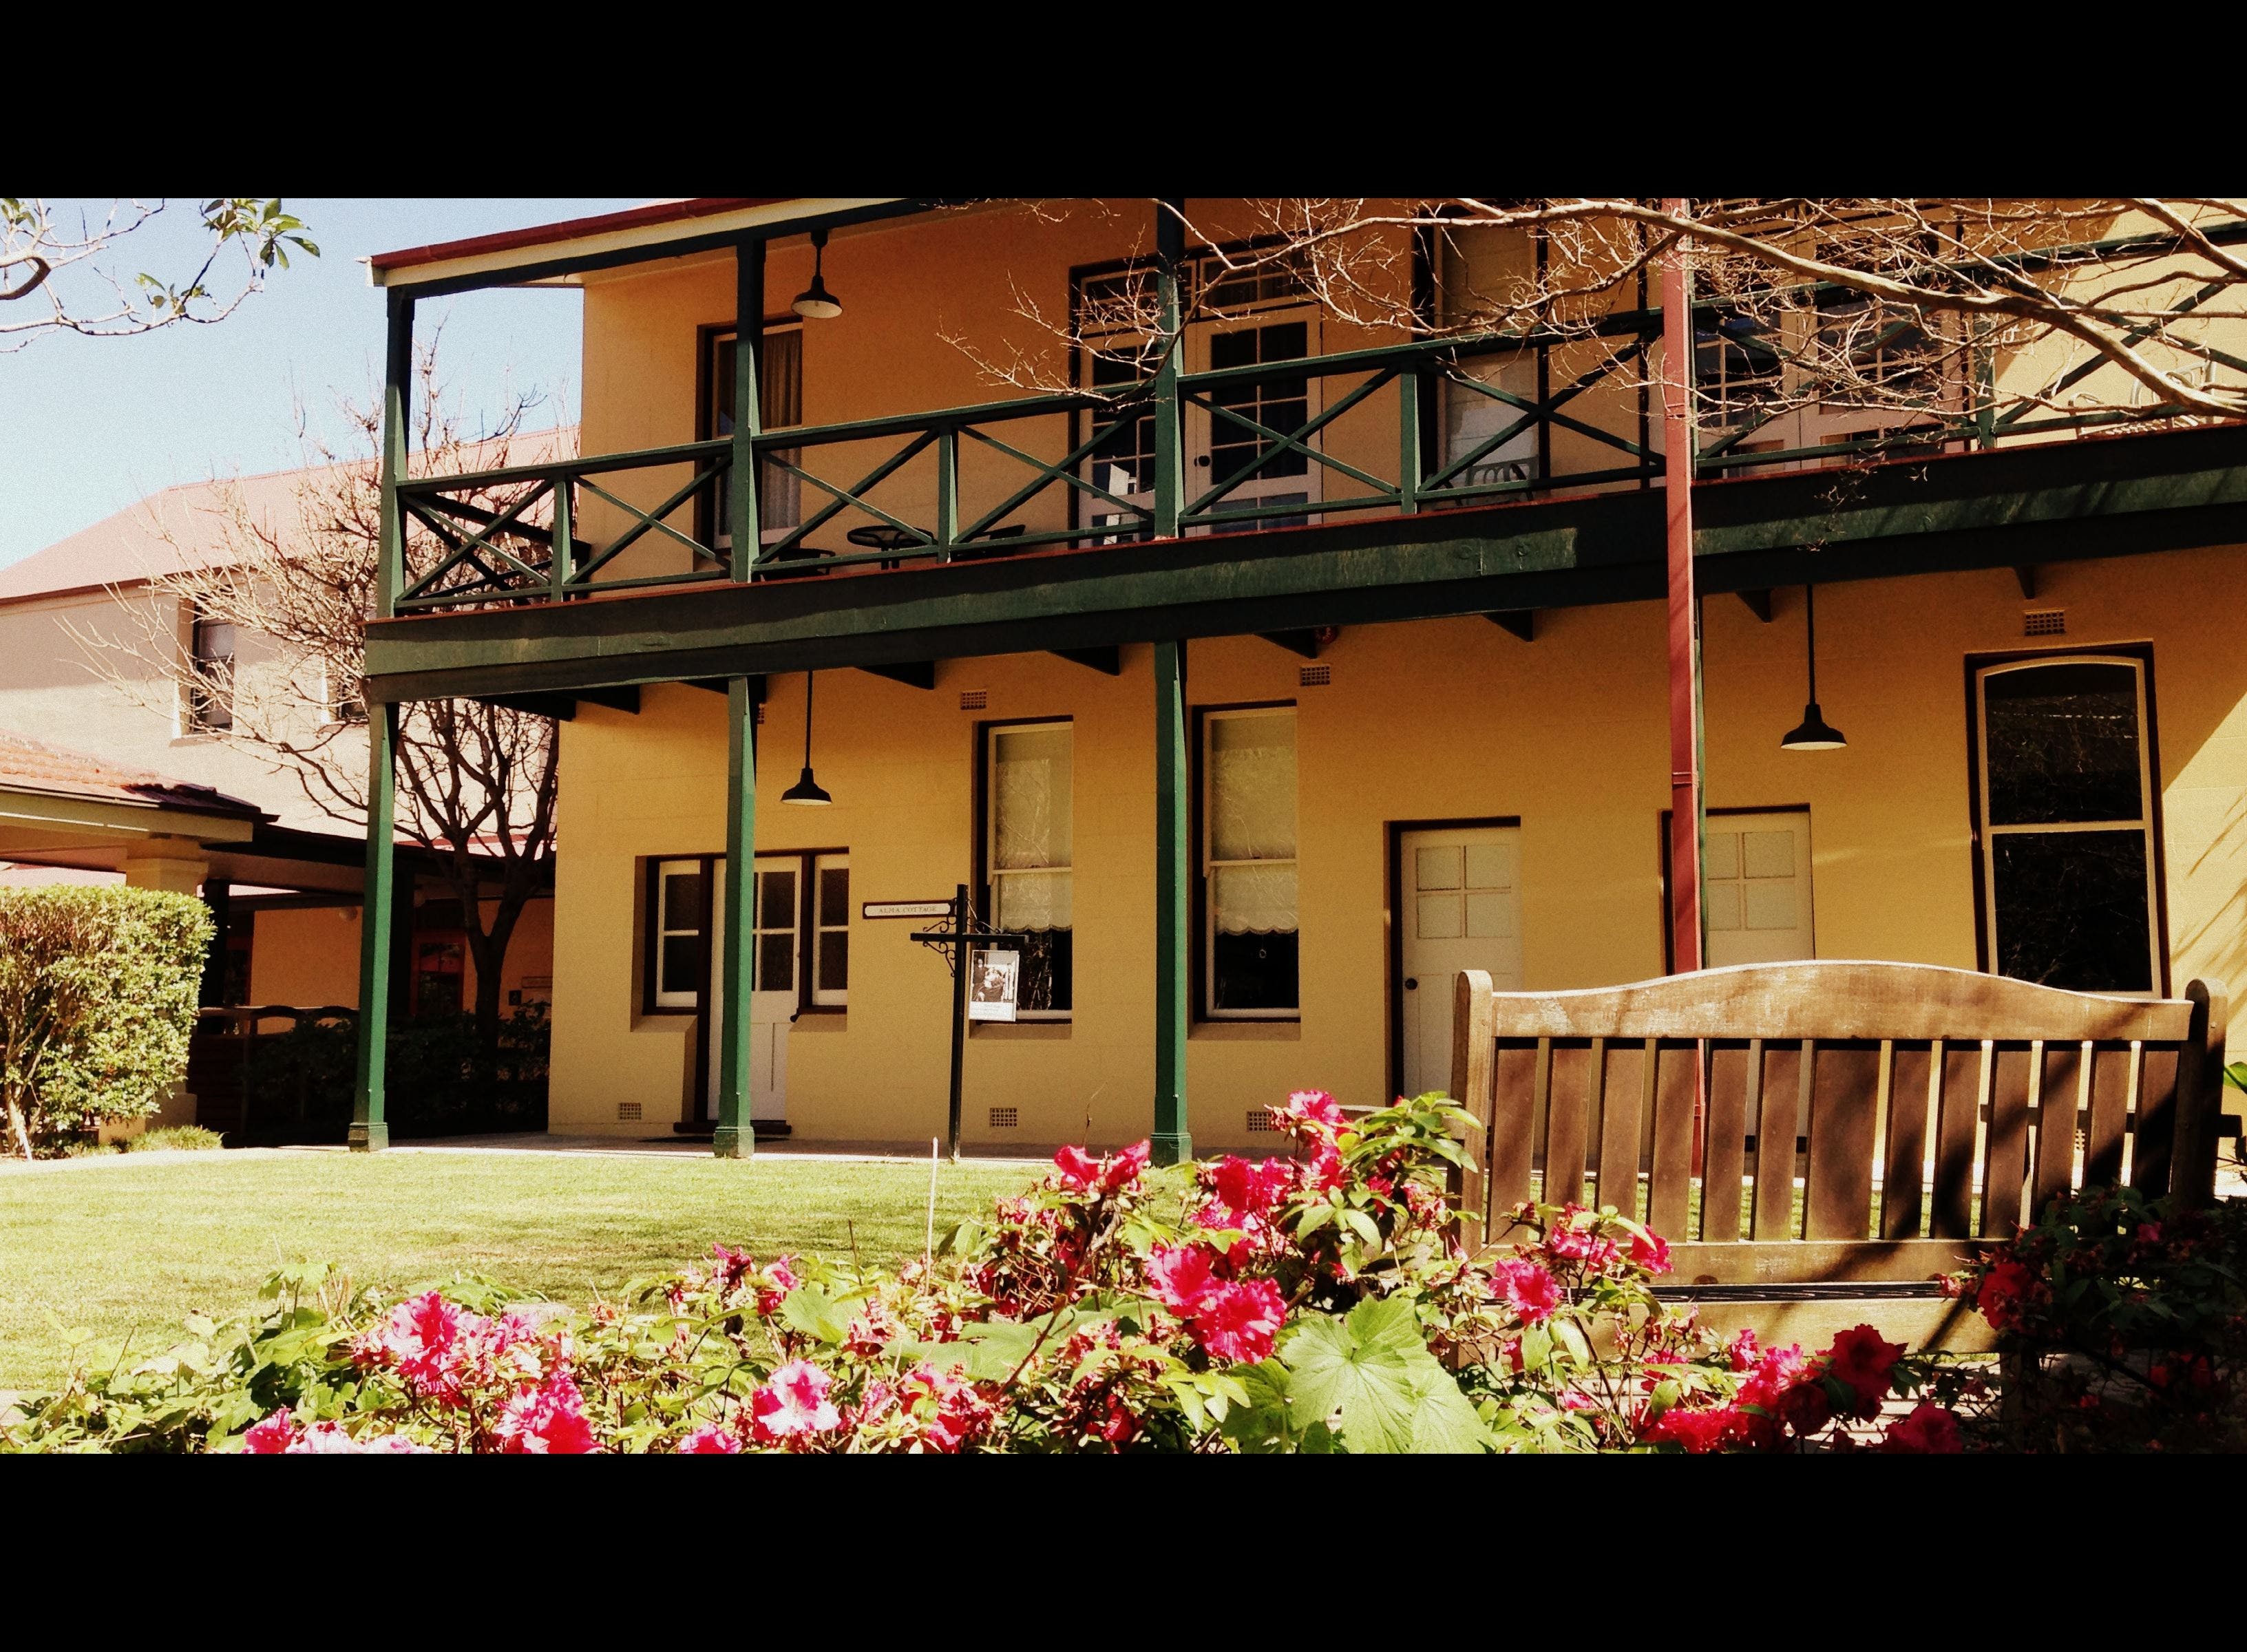 Mary MacKillop Place Museum - Geraldton Accommodation